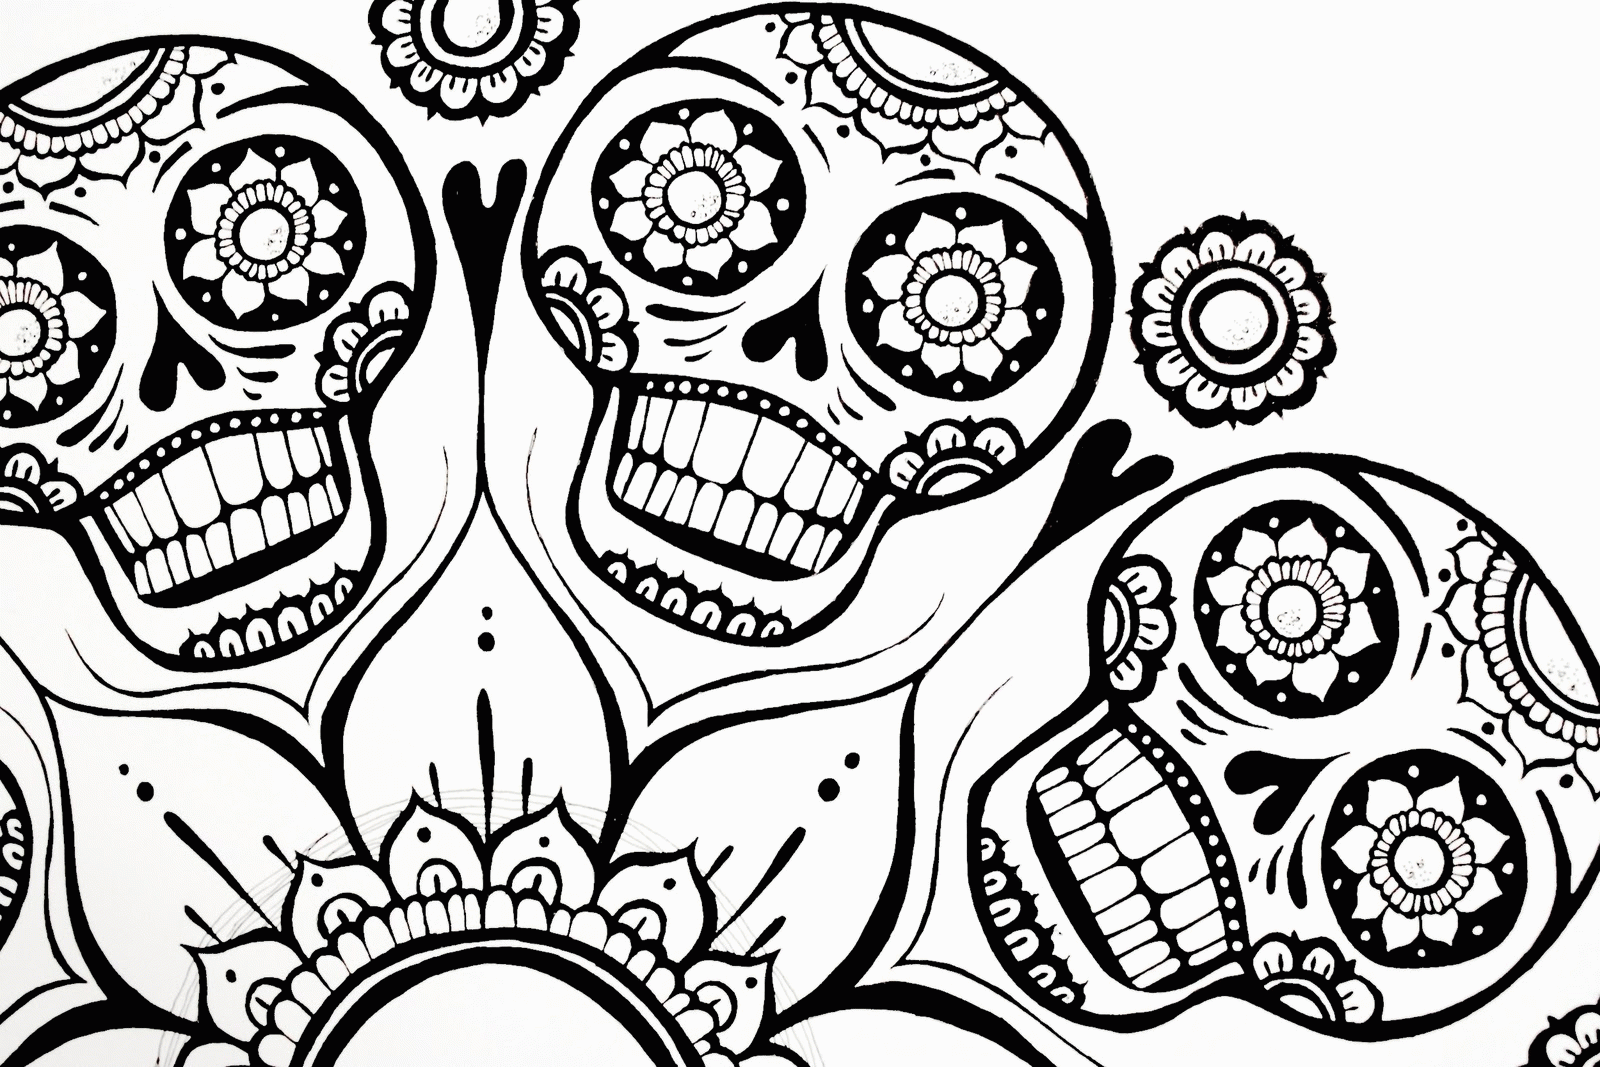 Sugar Skull Coloring Pages (16 Pictures) - Colorine.net | 22462